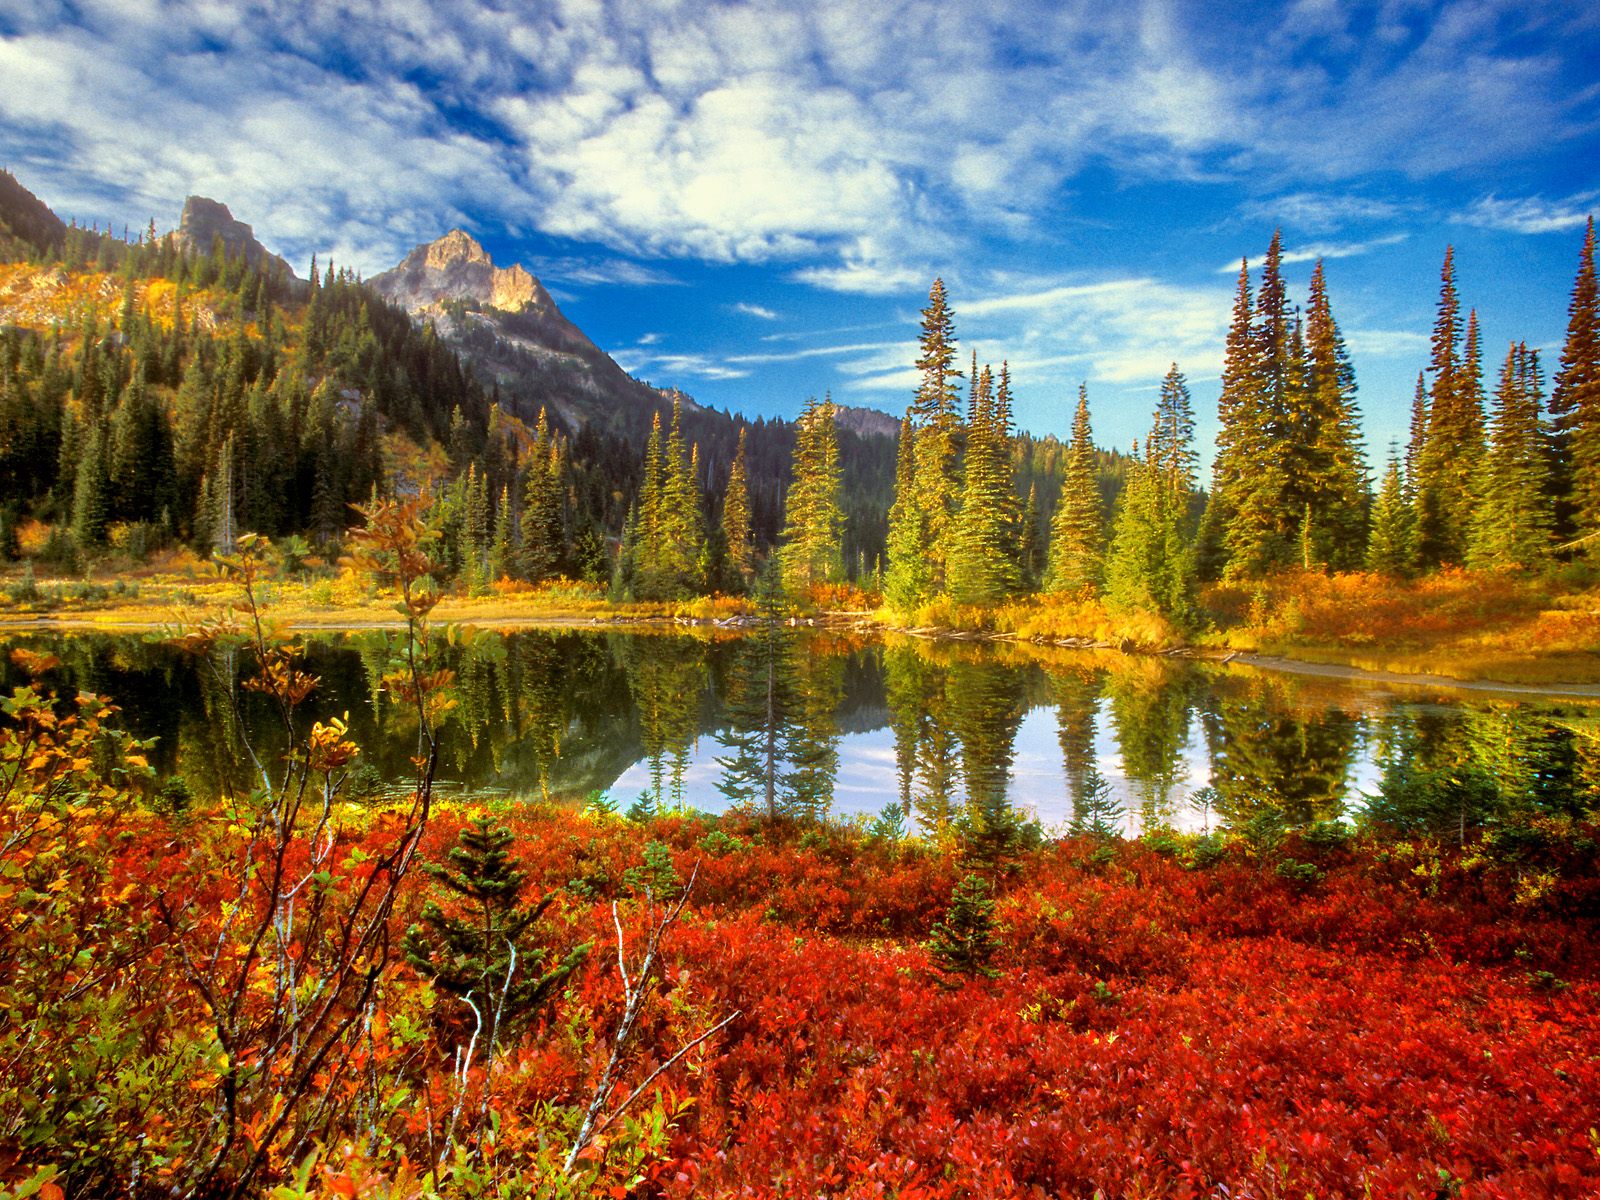 Serene mountain landscape with a tranquil pond, surrounded by lush forests and a picturesque lake.